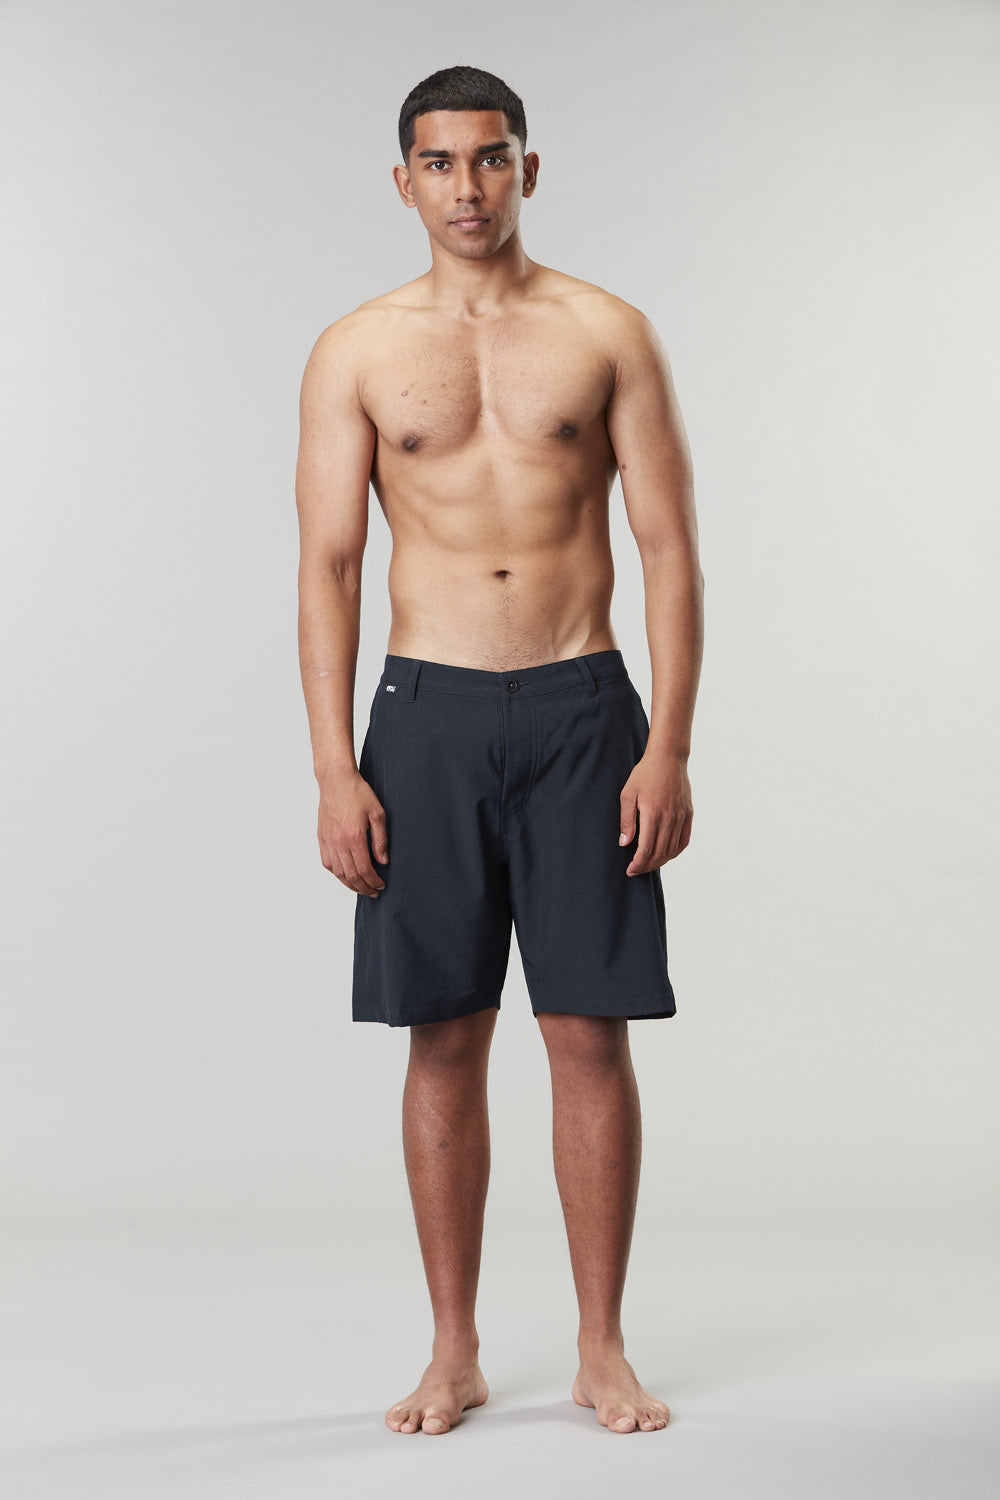 Picture Organic - M's Podar Hybrid 19 Boardshorts - Recycled Polyester - Weekendbee - sustainable sportswear